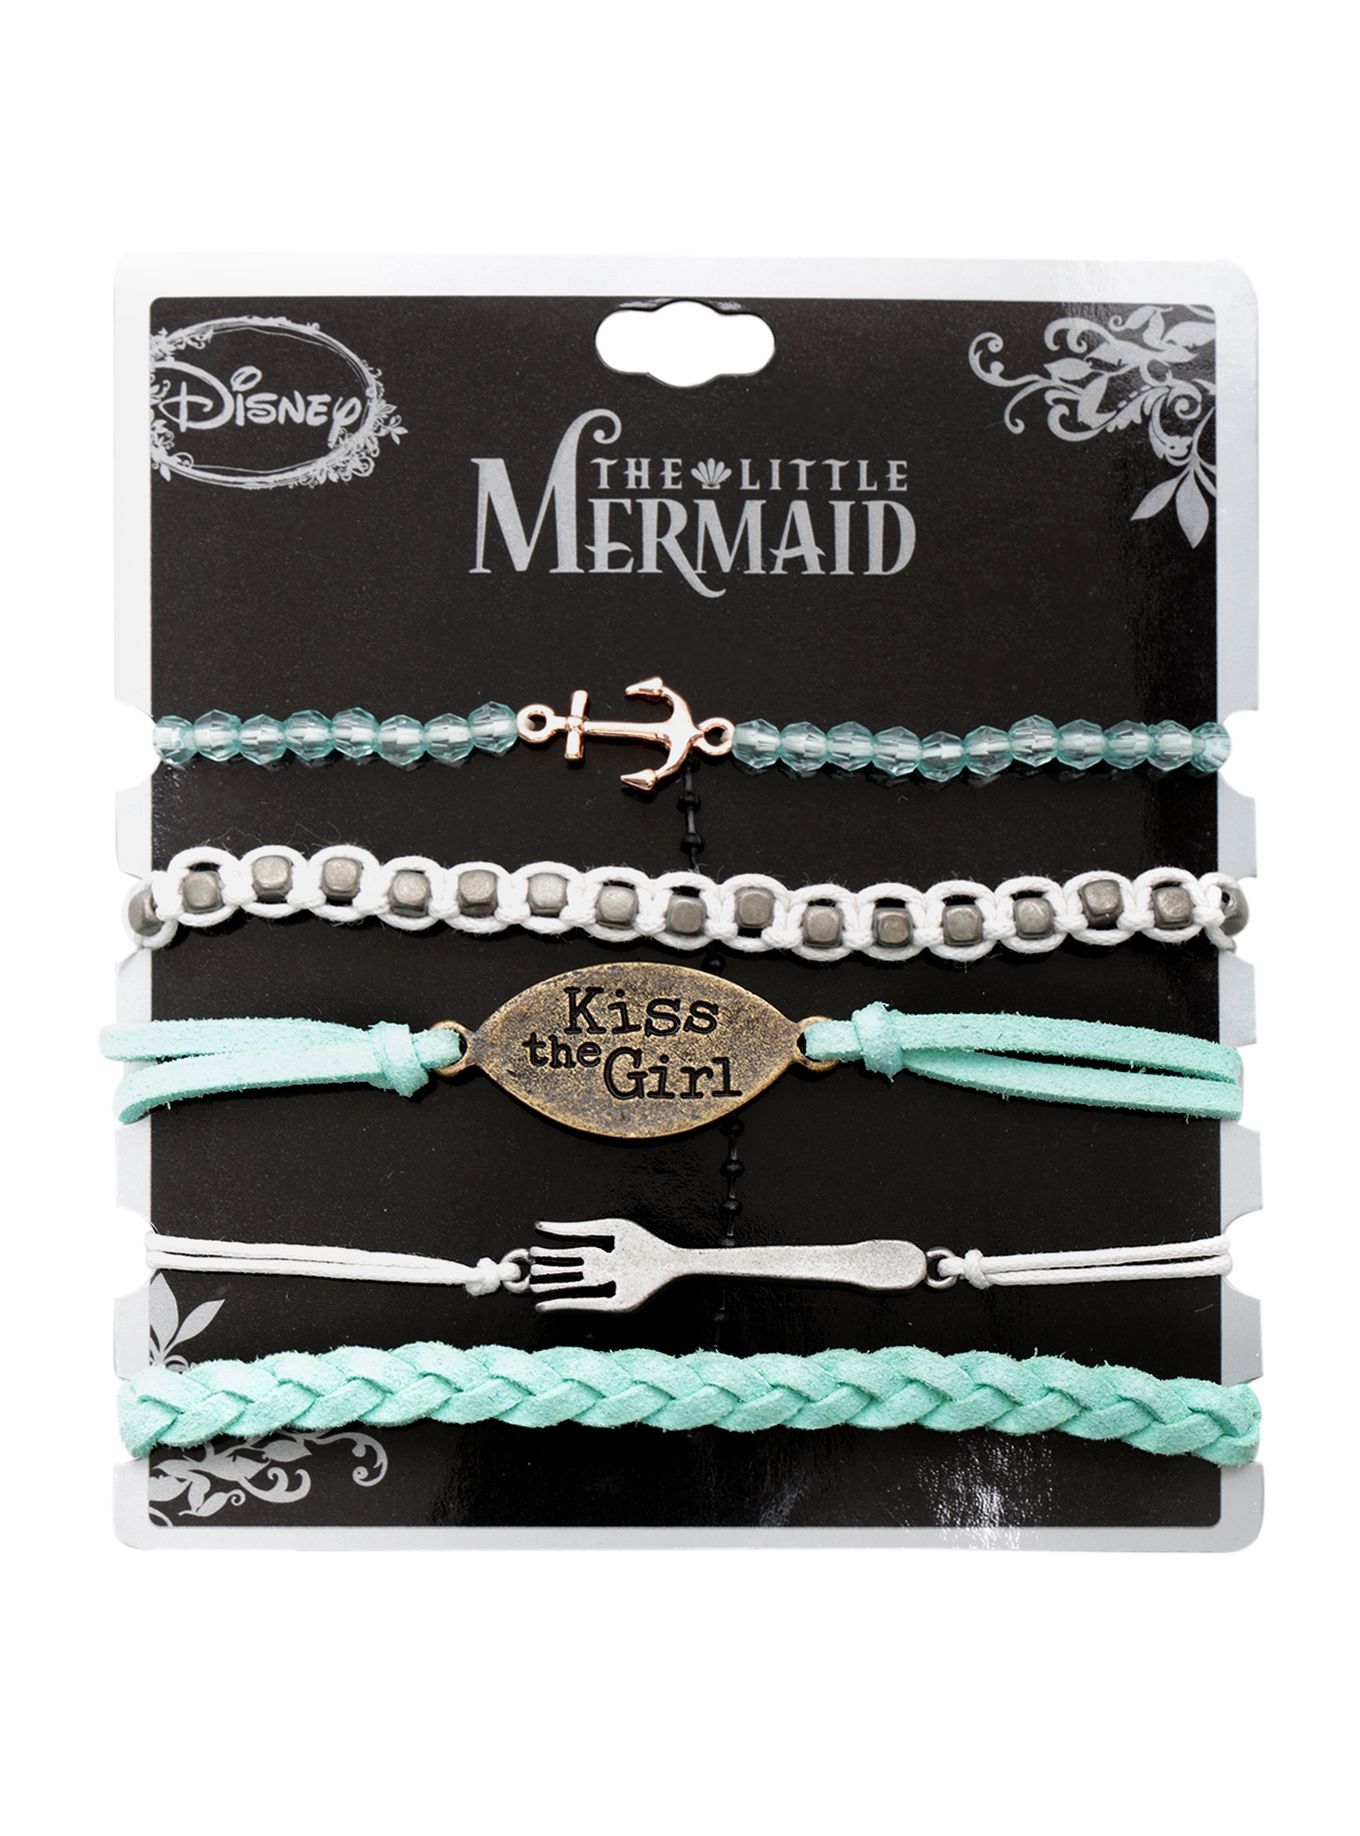 Disney The Little Mermaid Kiss The Girl Bracelet 5 Pack | Hot Topic. I want these so